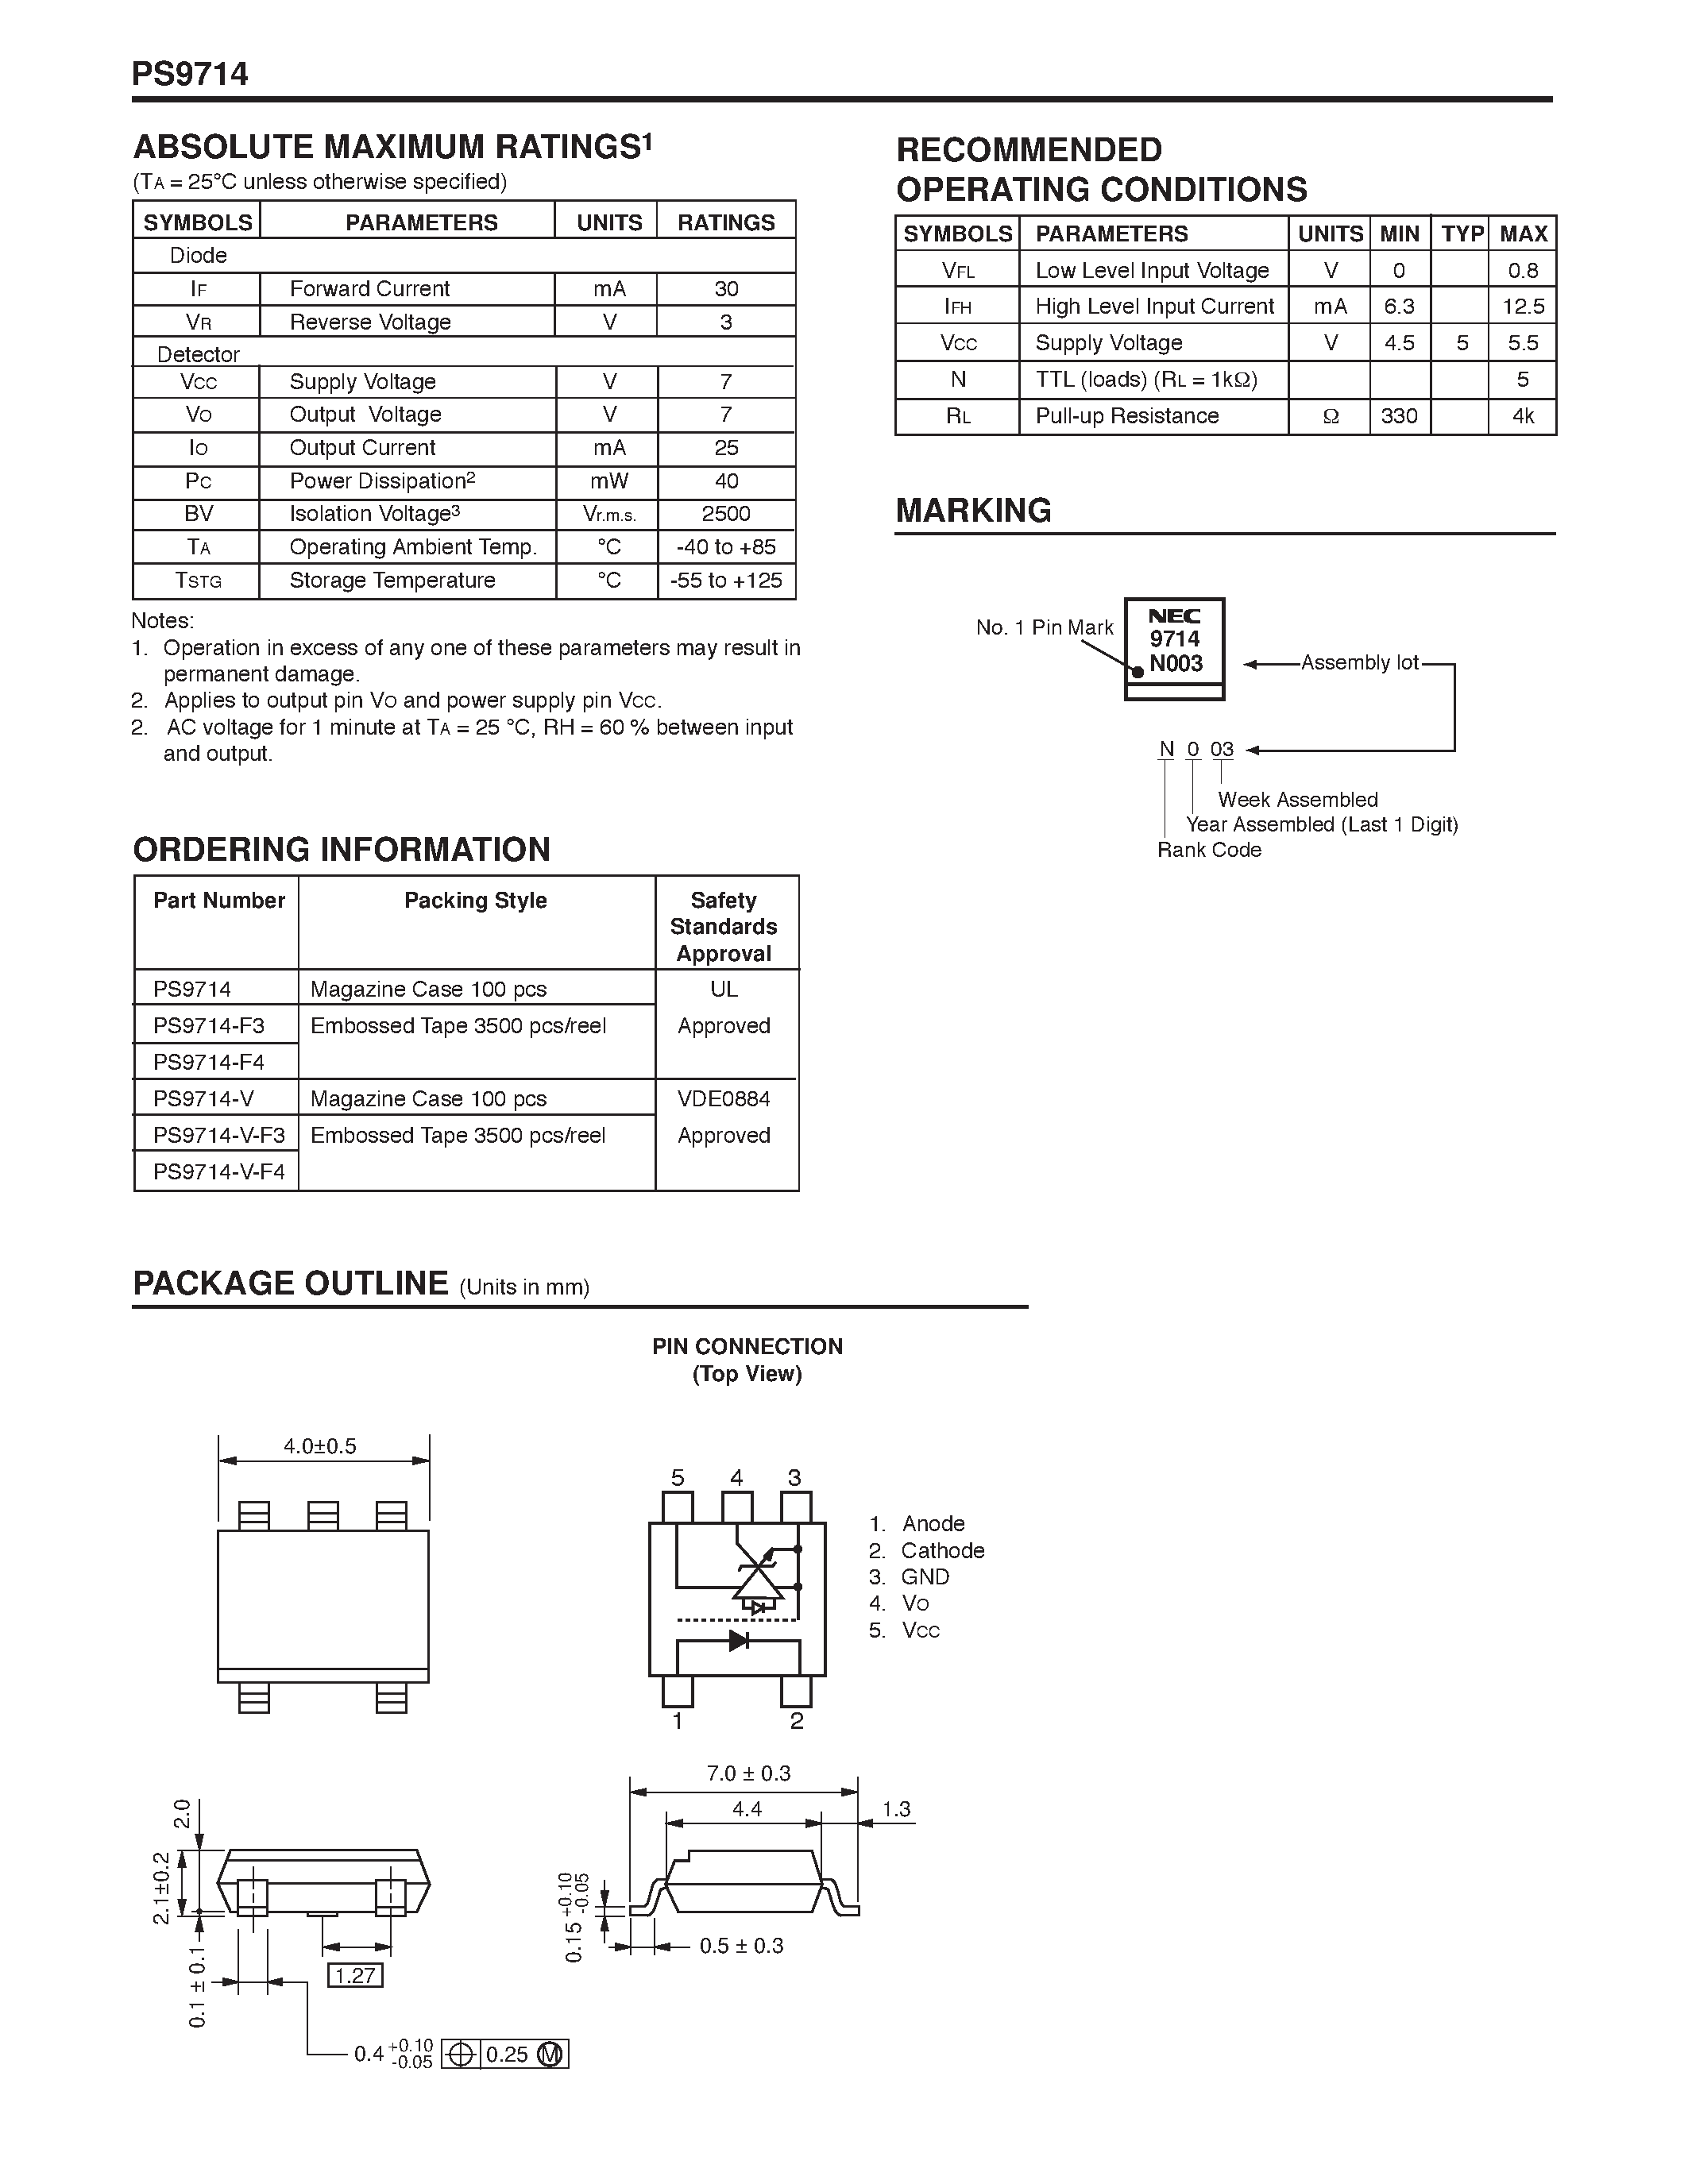 Datasheet PS9714-V-F4 - NECs HIGH CMR / 10 Mbps OPEN COLLECTOR OUTPUT TYPE 5 PIN SOP OPTOCOUPLER page 2